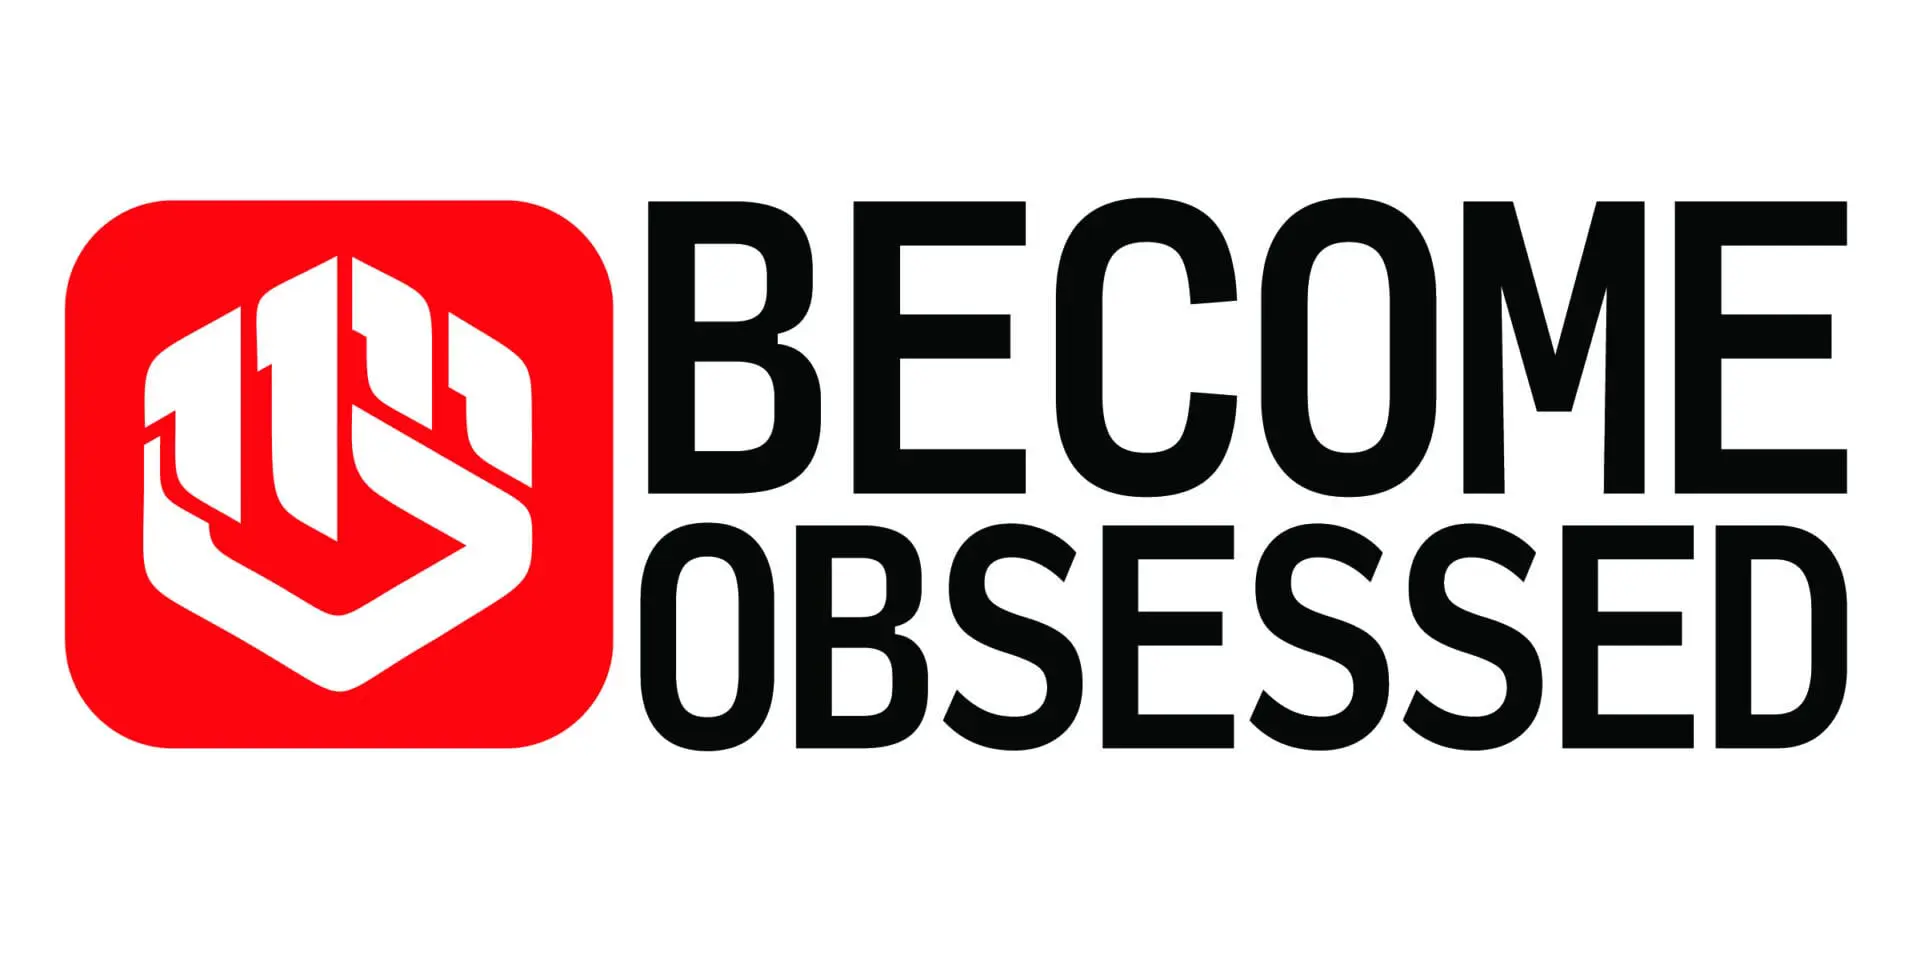 A logo for beco obsession